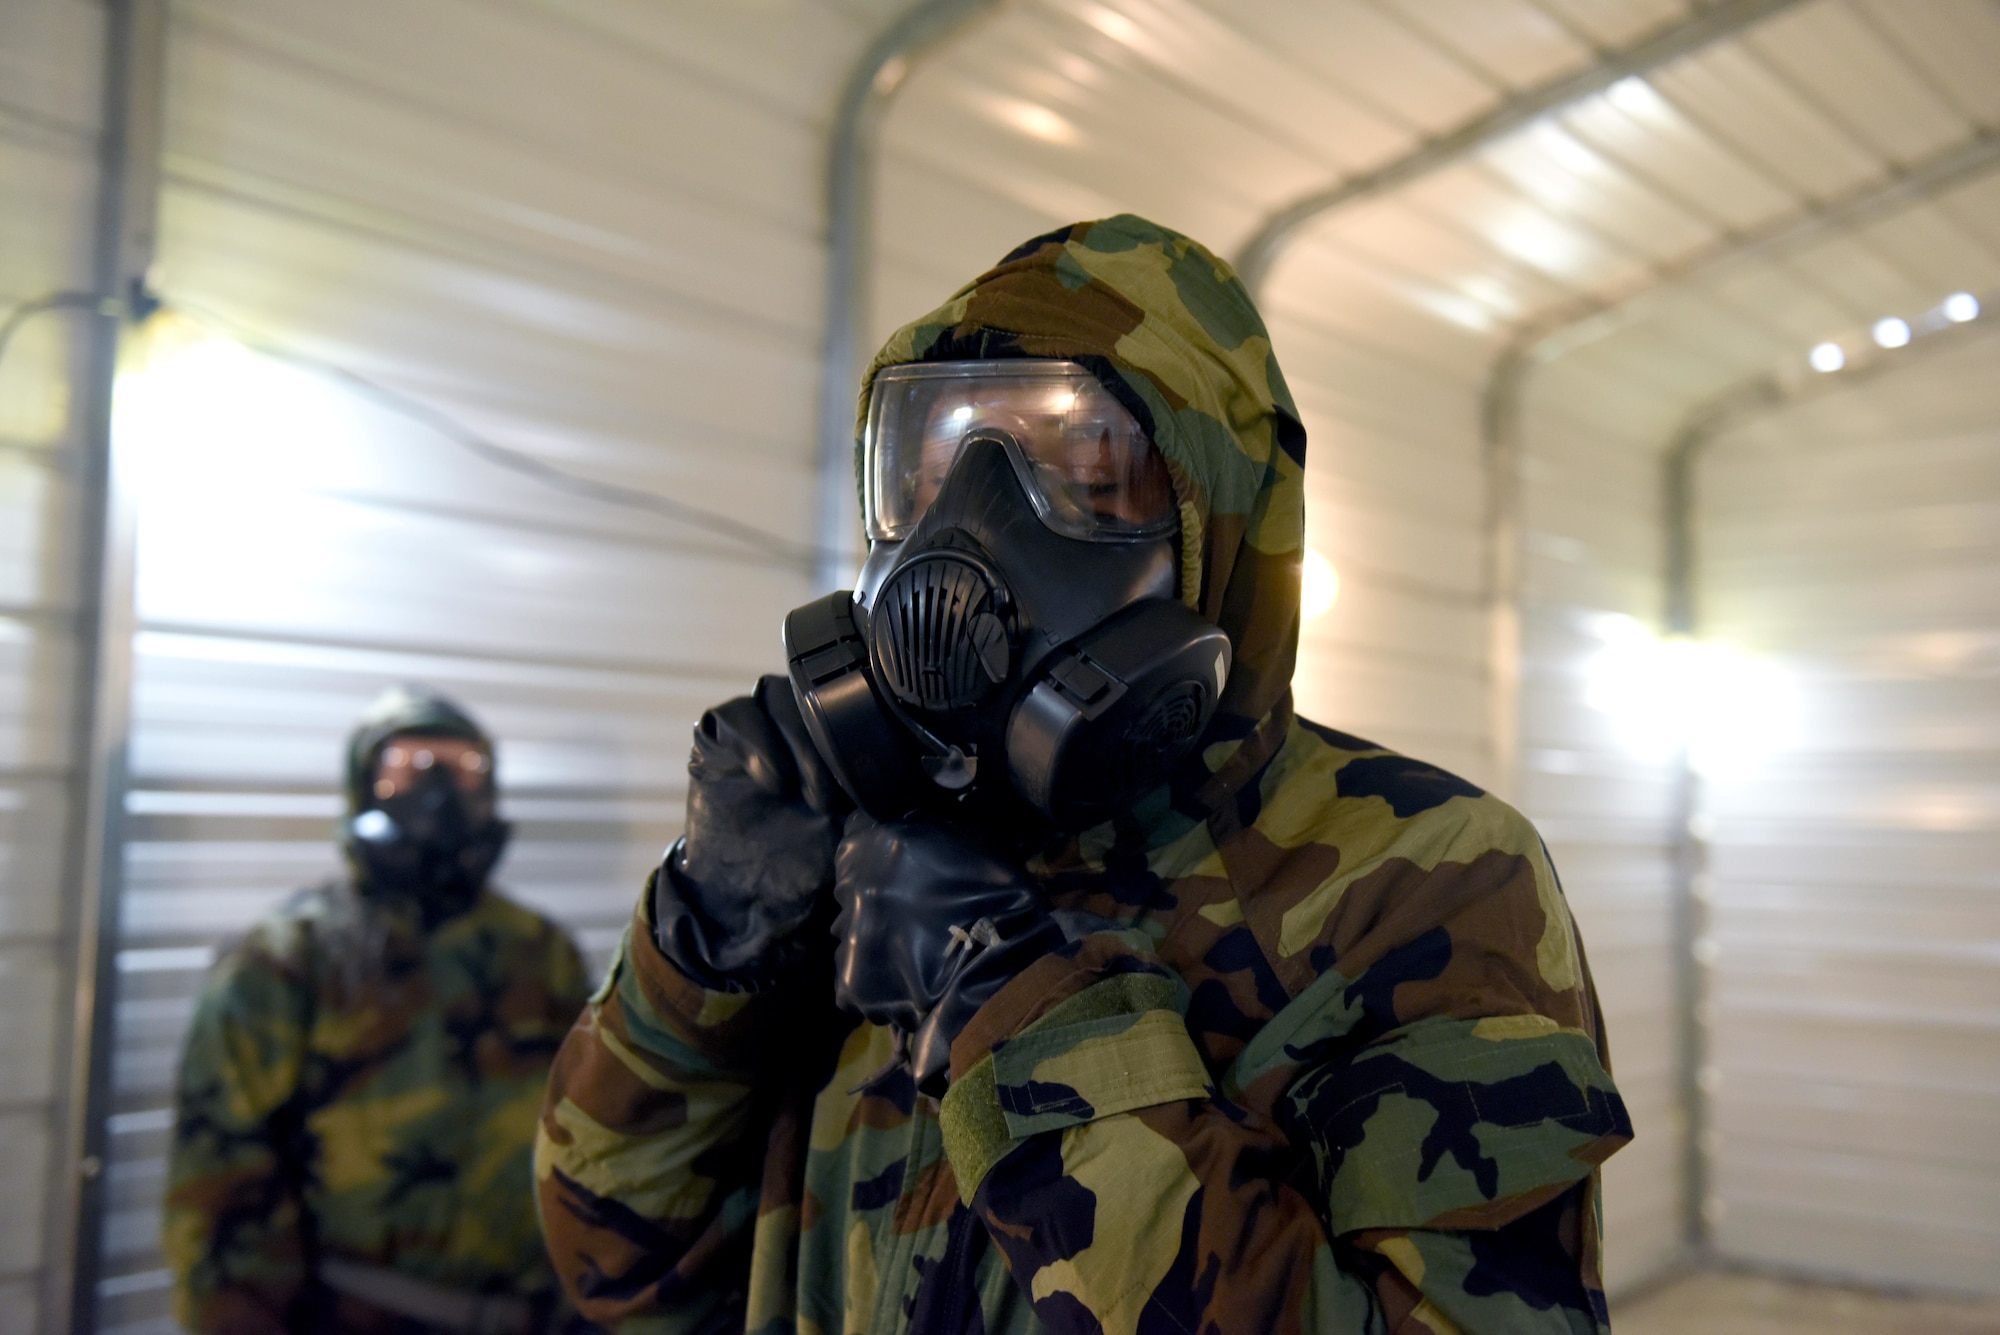 Staff Sgt. Kyaries Williams, 14th Security Forces Squadron, begins to take off his gas mask in the chamber, March 28, 2019, on Columbus Air Force Base, Miss. The Blaze Arena is the newest addition to Columbus Air Force Bases facilities in preparation for Airmen readiness. (U.S. Air Force photo by Senior Airman Beaux Hebert)